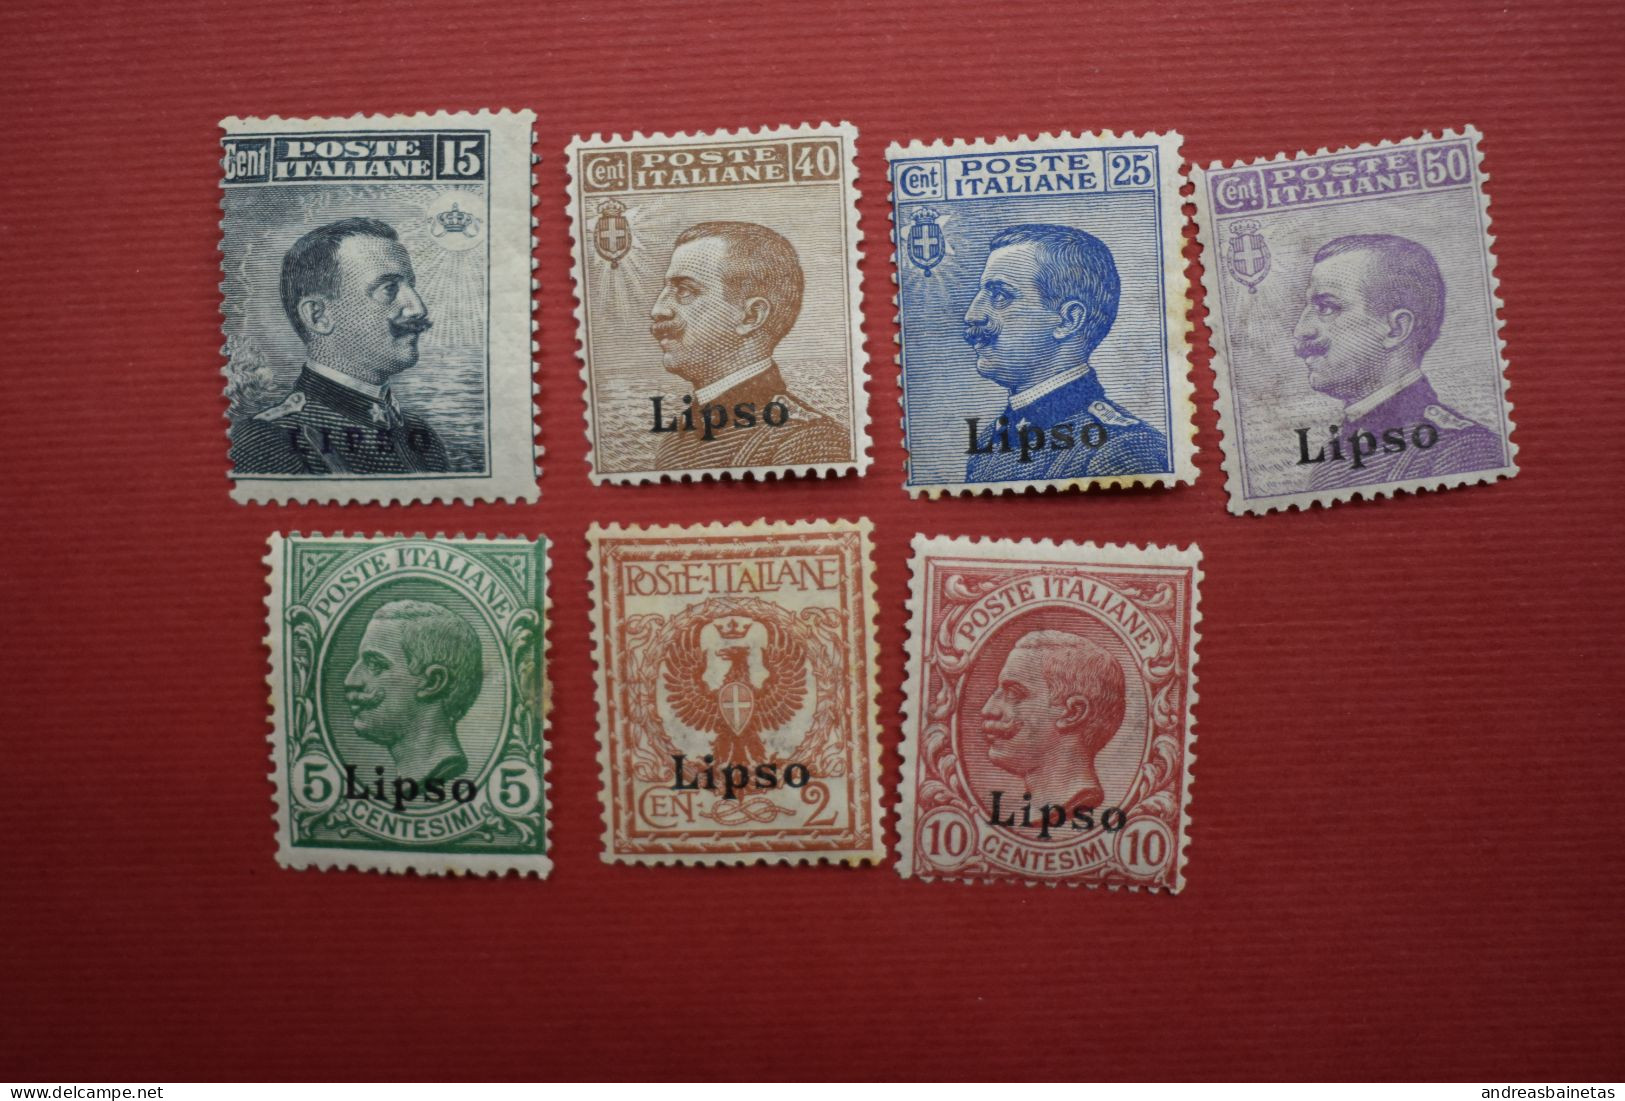 Stamps Greece ITALIAN OCCUPATION - ITALIAN POST 1912 "LIPSO" Ovpt, Complete Set Of 7 Values, M. (Hellas 3VII/9VII). - Dodécanèse